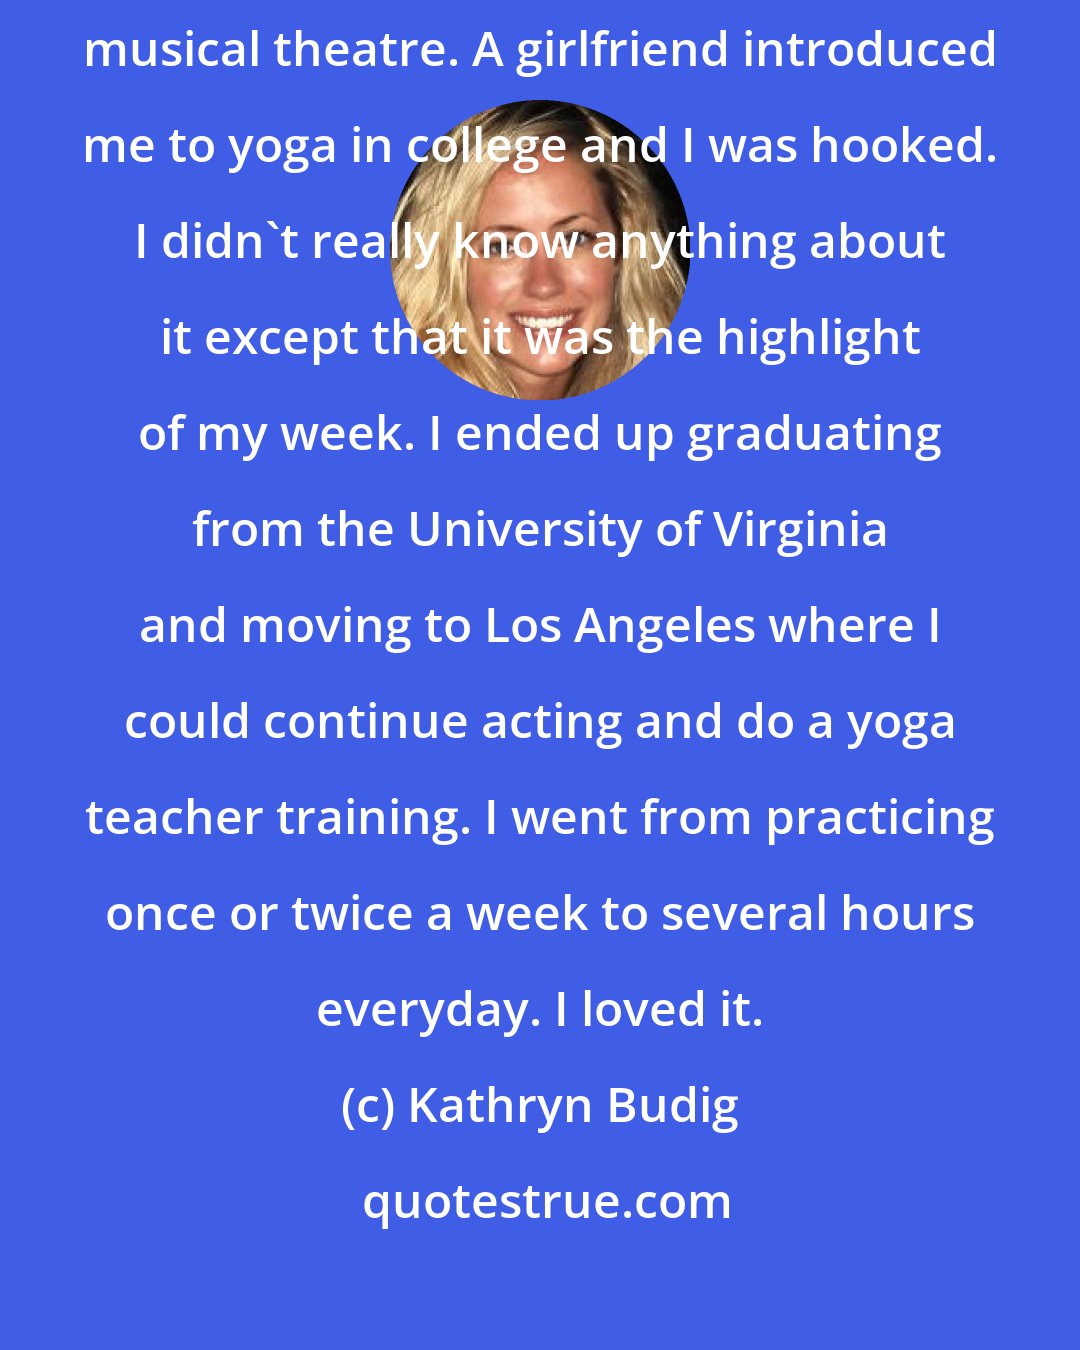 Kathryn Budig: I was a tomboy growing up and then fell into the world of theatre and musical theatre. A girlfriend introduced me to yoga in college and I was hooked. I didn't really know anything about it except that it was the highlight of my week. I ended up graduating from the University of Virginia and moving to Los Angeles where I could continue acting and do a yoga teacher training. I went from practicing once or twice a week to several hours everyday. I loved it.